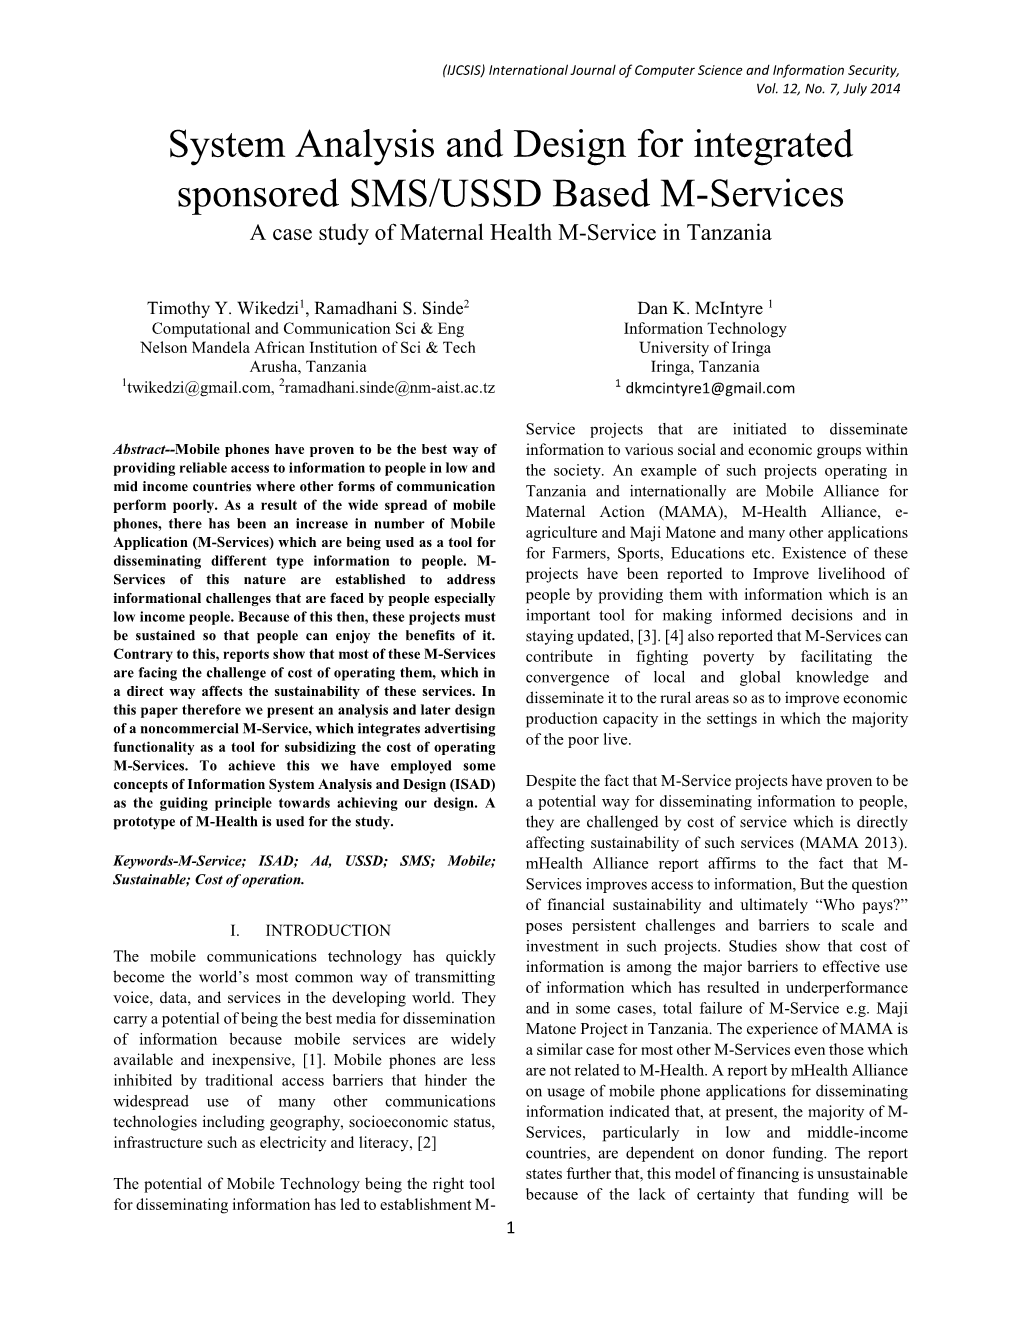 System Analysis and Design for Integrated Sponsored SMS/USSD Based M-Services a Case Study of Maternal Health M-Service in Tanzania